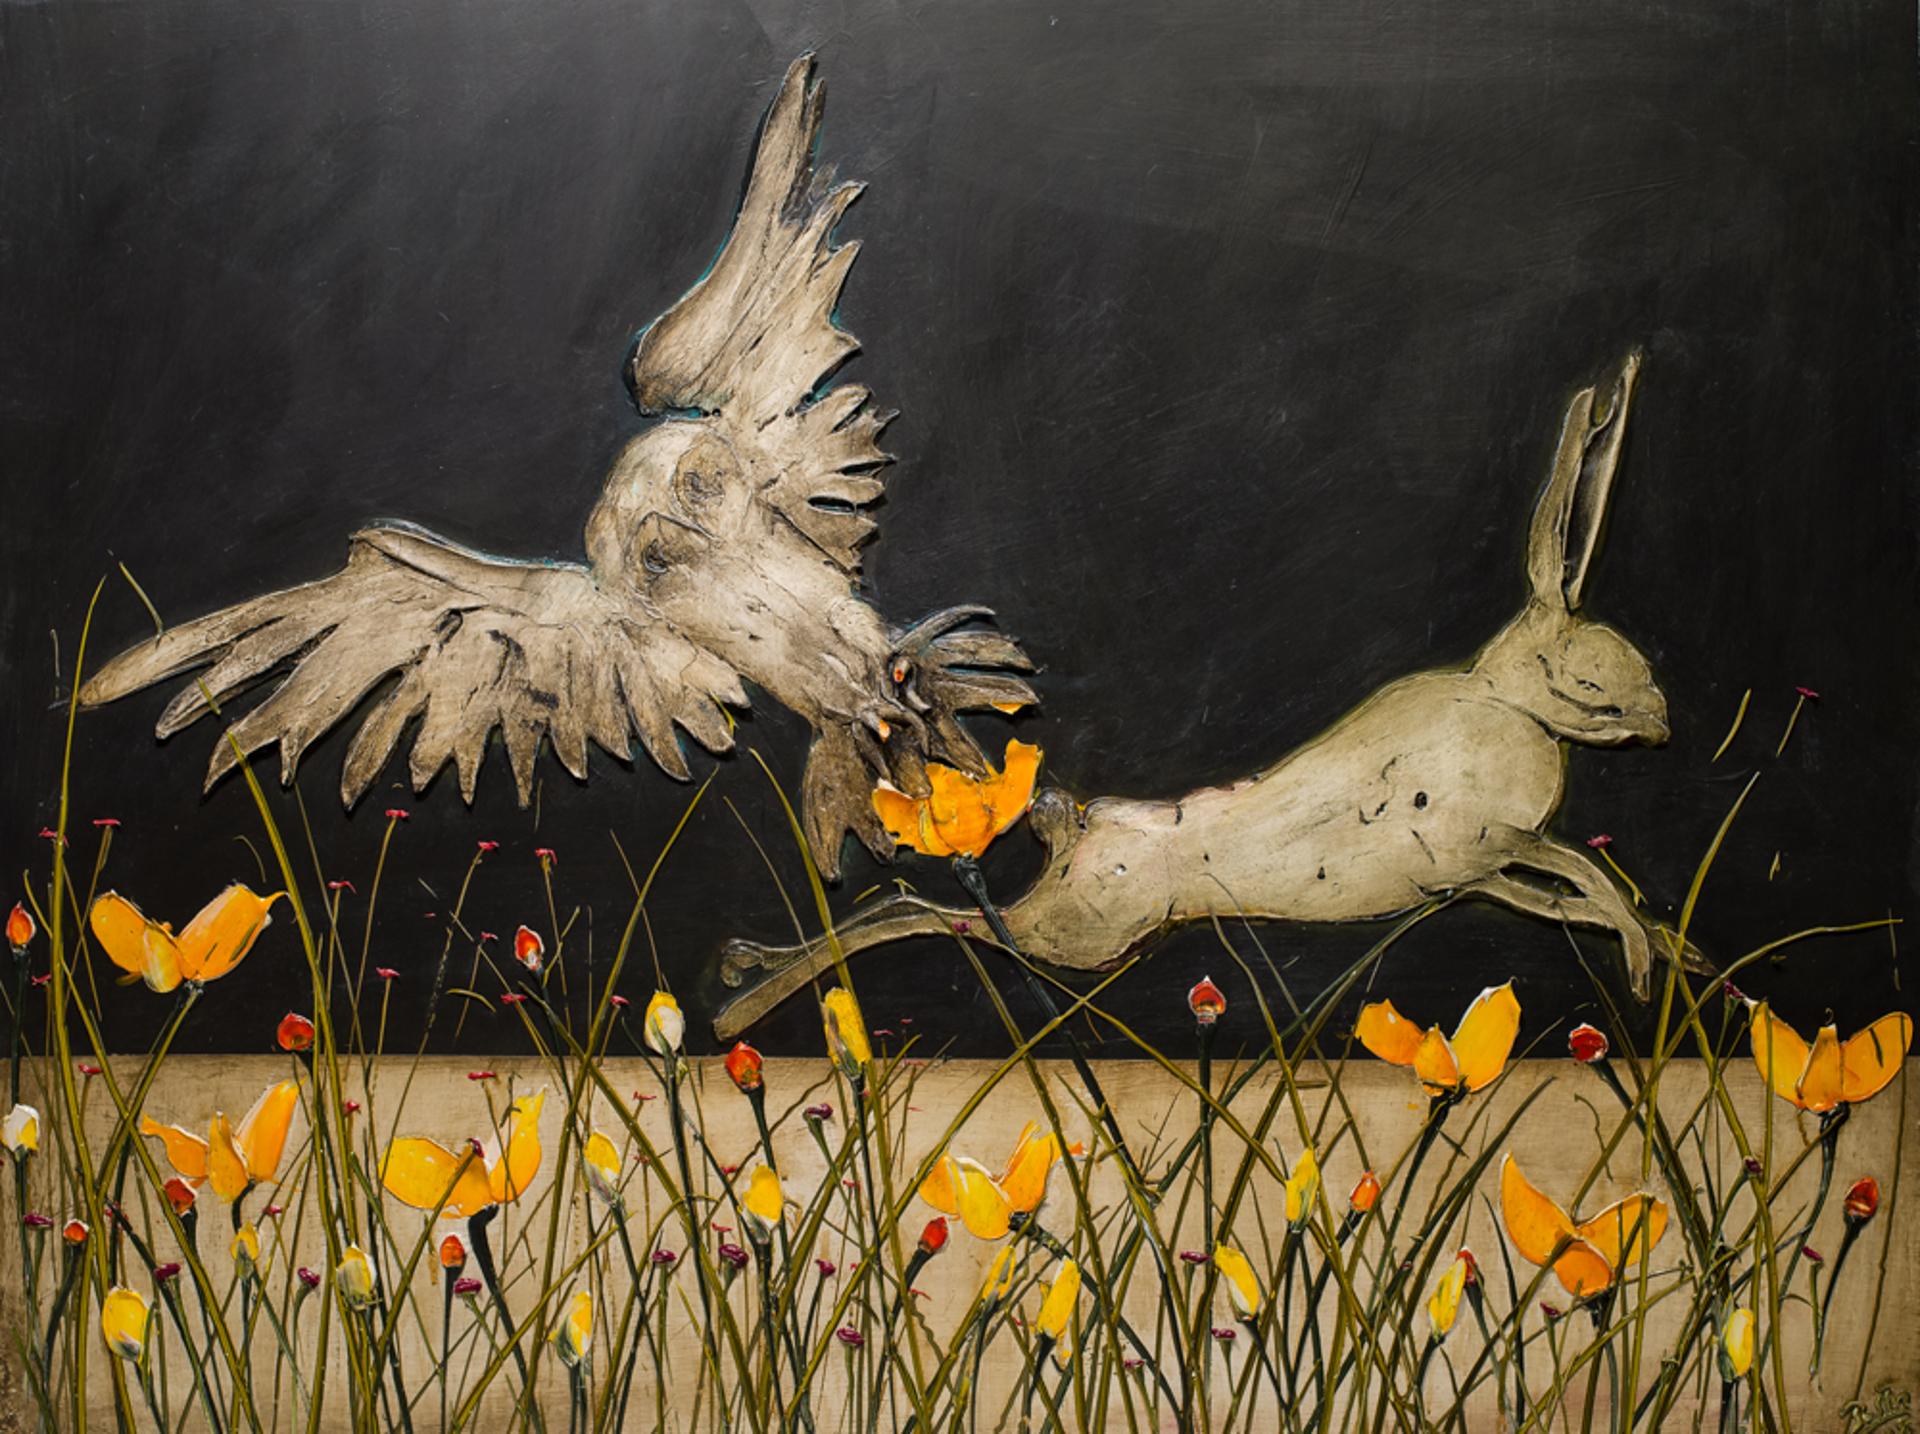 SUSPENSION OF DISBELIEF SOD48X36-2018-211 OWL/HARE by Justin Gaffrey